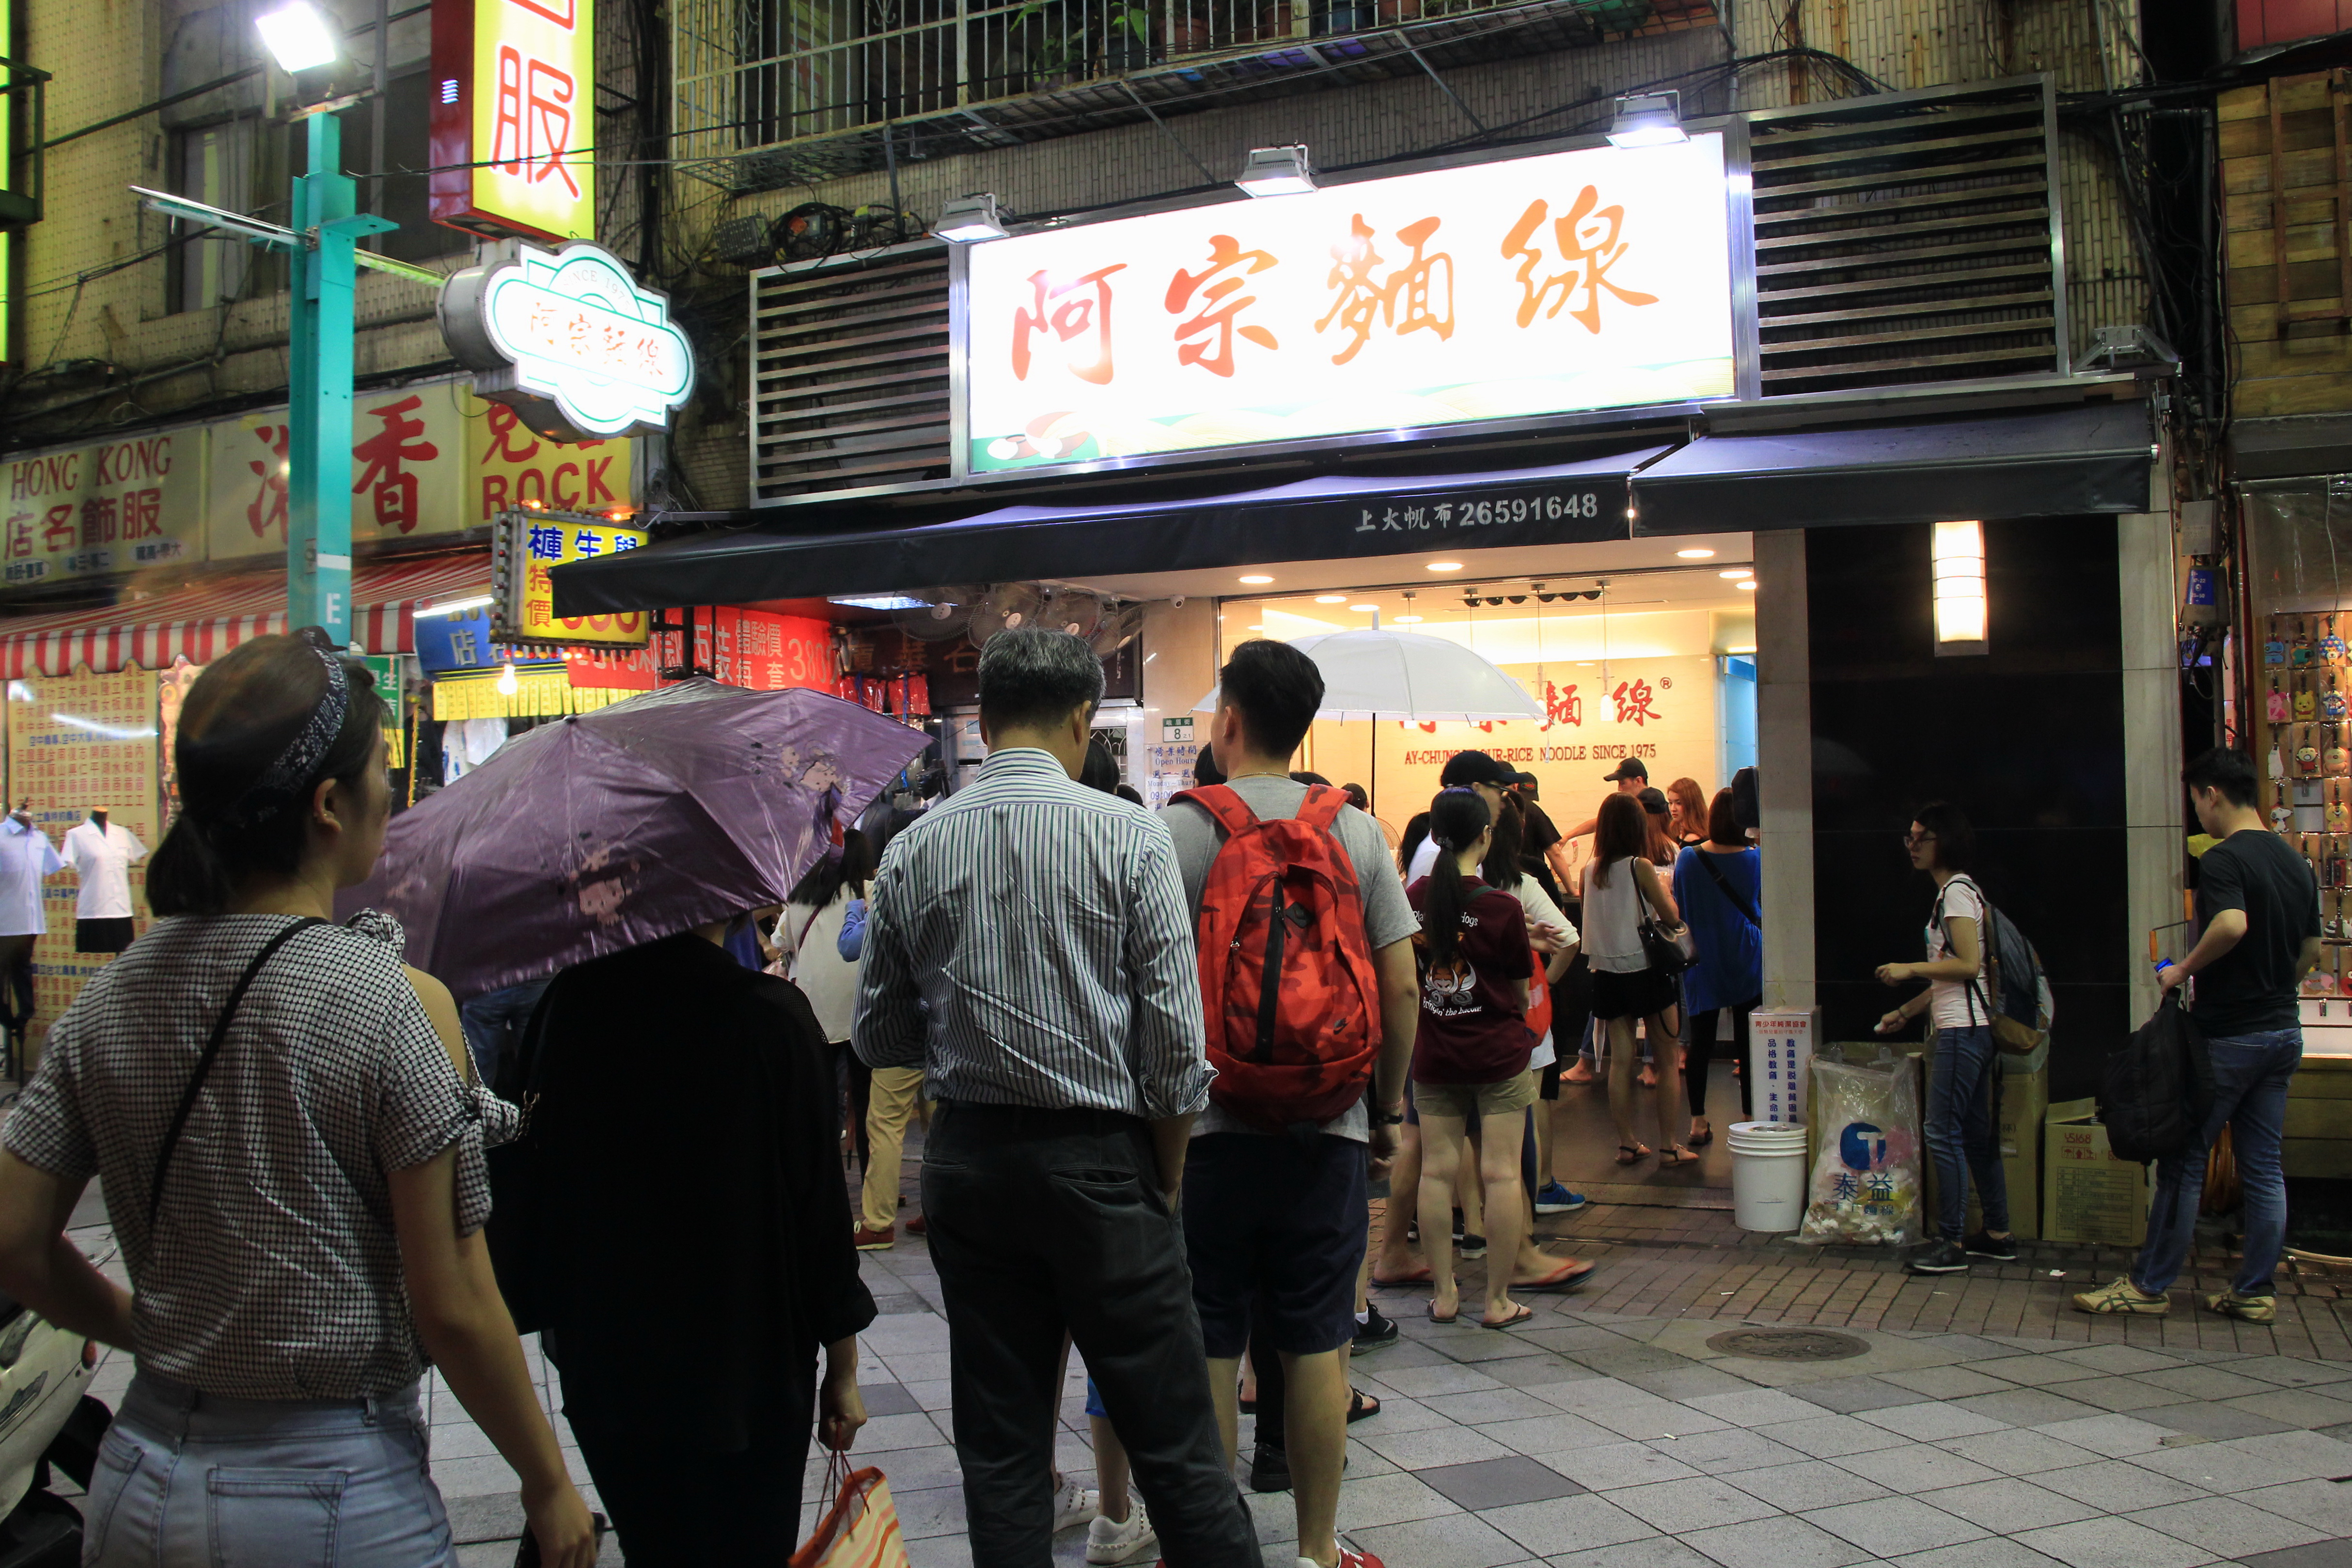 Specialties you shouldn’t miss at Taiwan’s famous night market